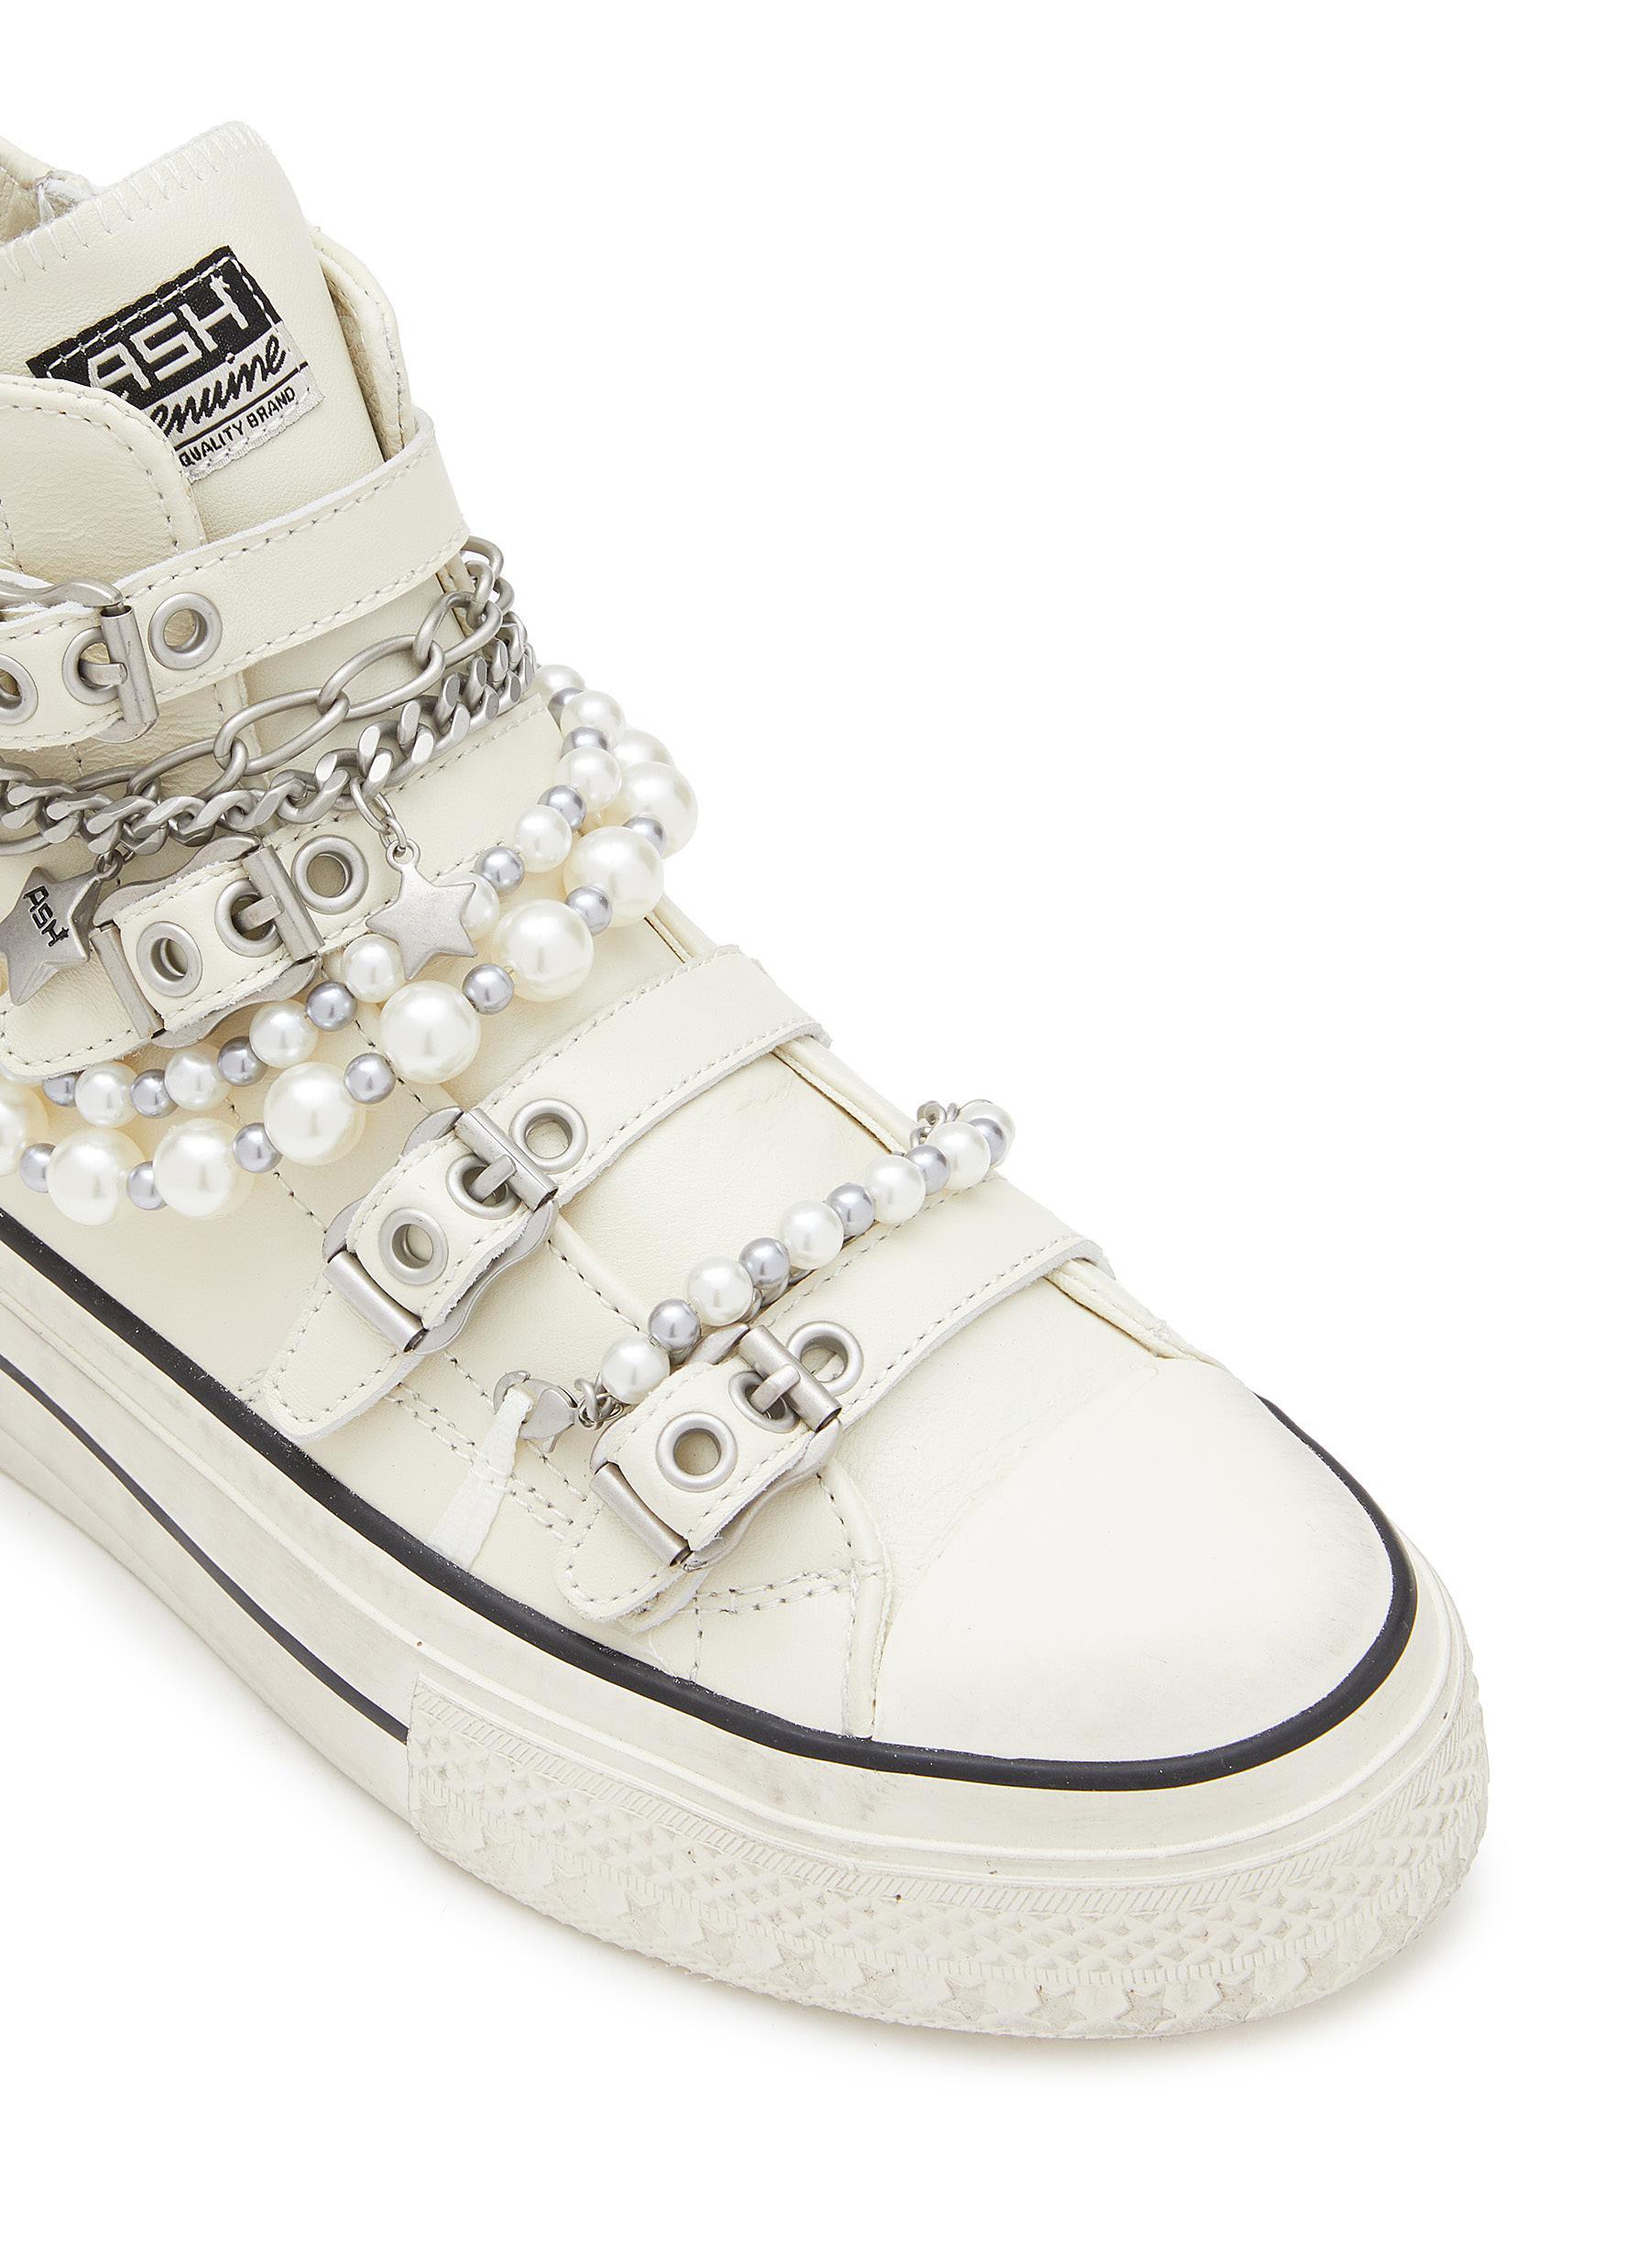 Ash Rainbow Chain Embellished Leather High-top Sneakers in White | Lyst